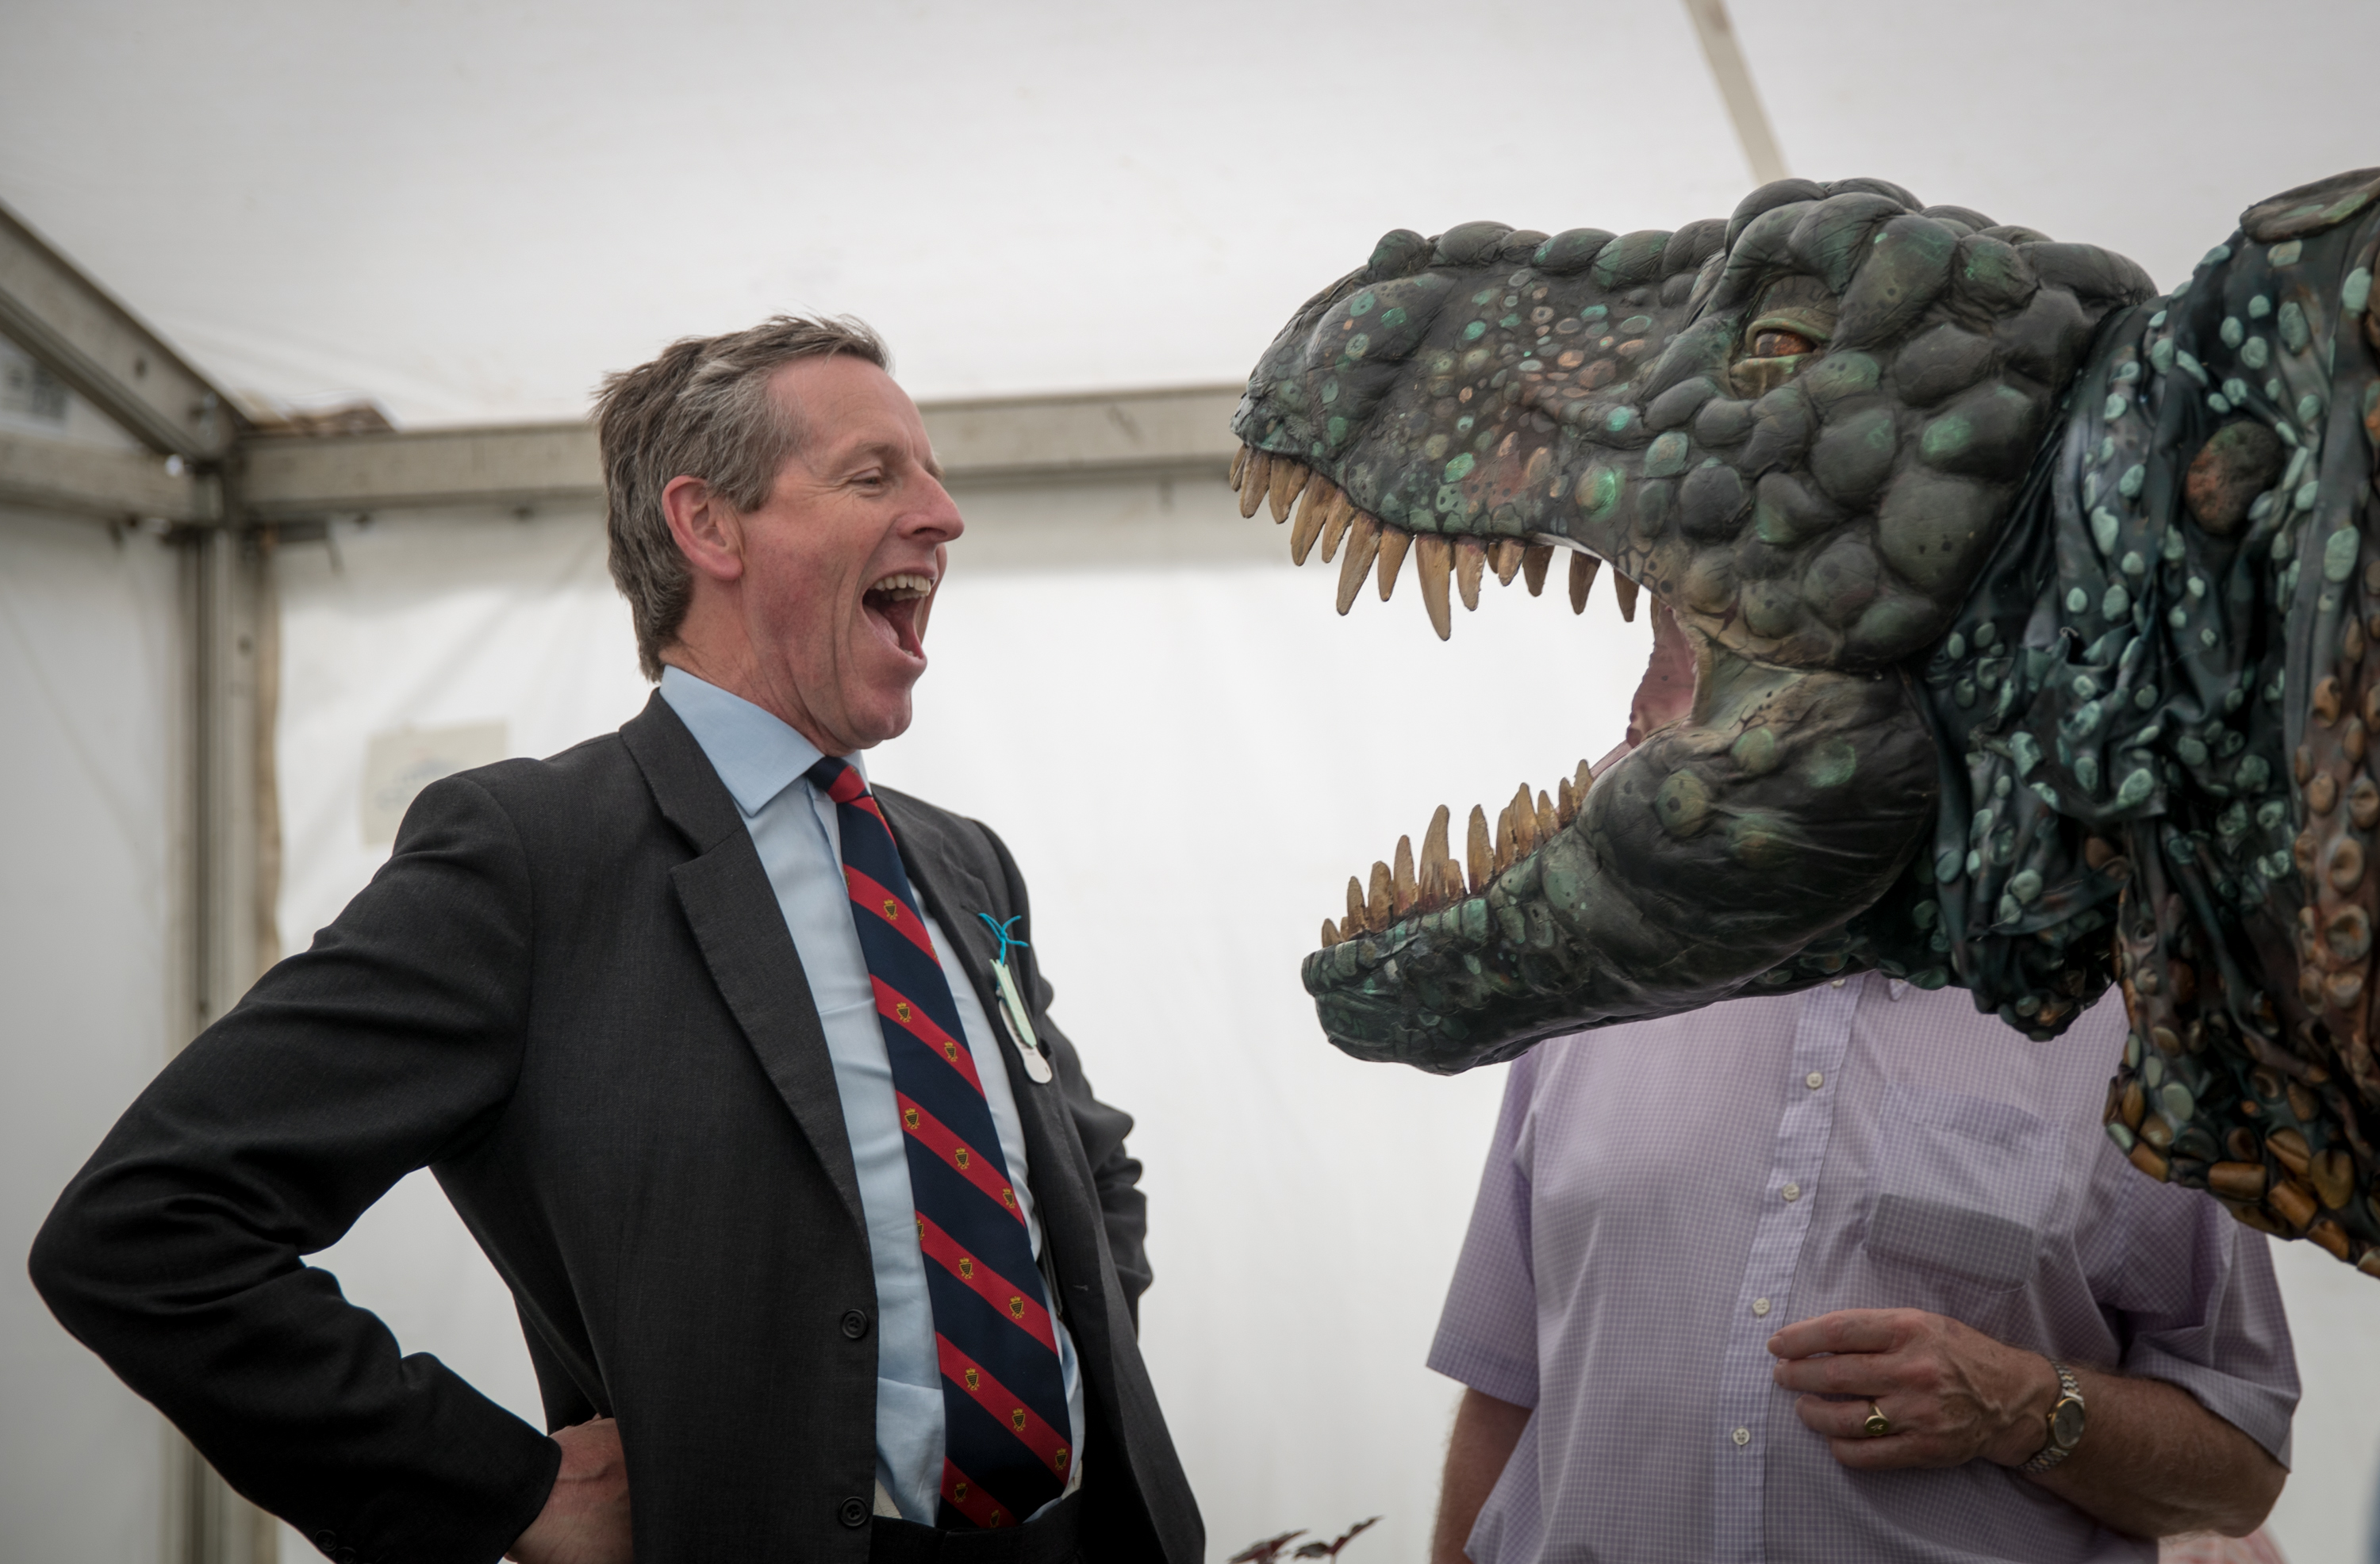 A man reacts to the Eden Project's life-size juvenile Tyrannosaurus rex that has been brought as a preview to the nearby attraction's "Dinosaur Uprising" opening this summer on June 9, 2016 near Wadebridge, England. (Matt Cardy—Getty Images)